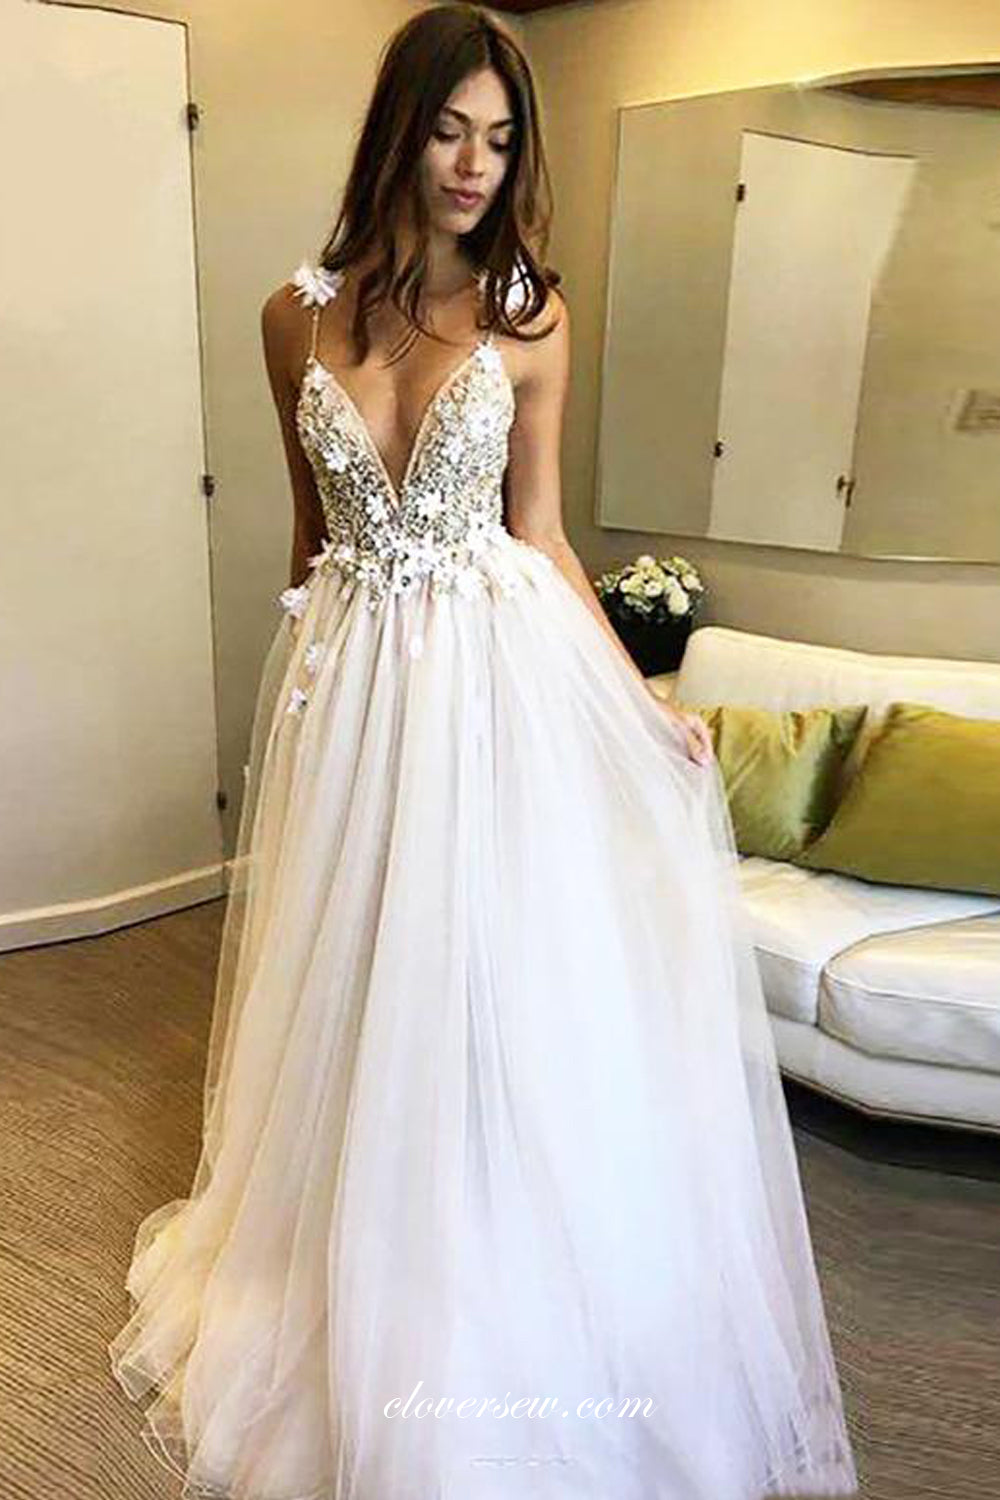 3D Floral Applique Bead Lace Sleeveless A-line Country Wedding Dresses, CW0273